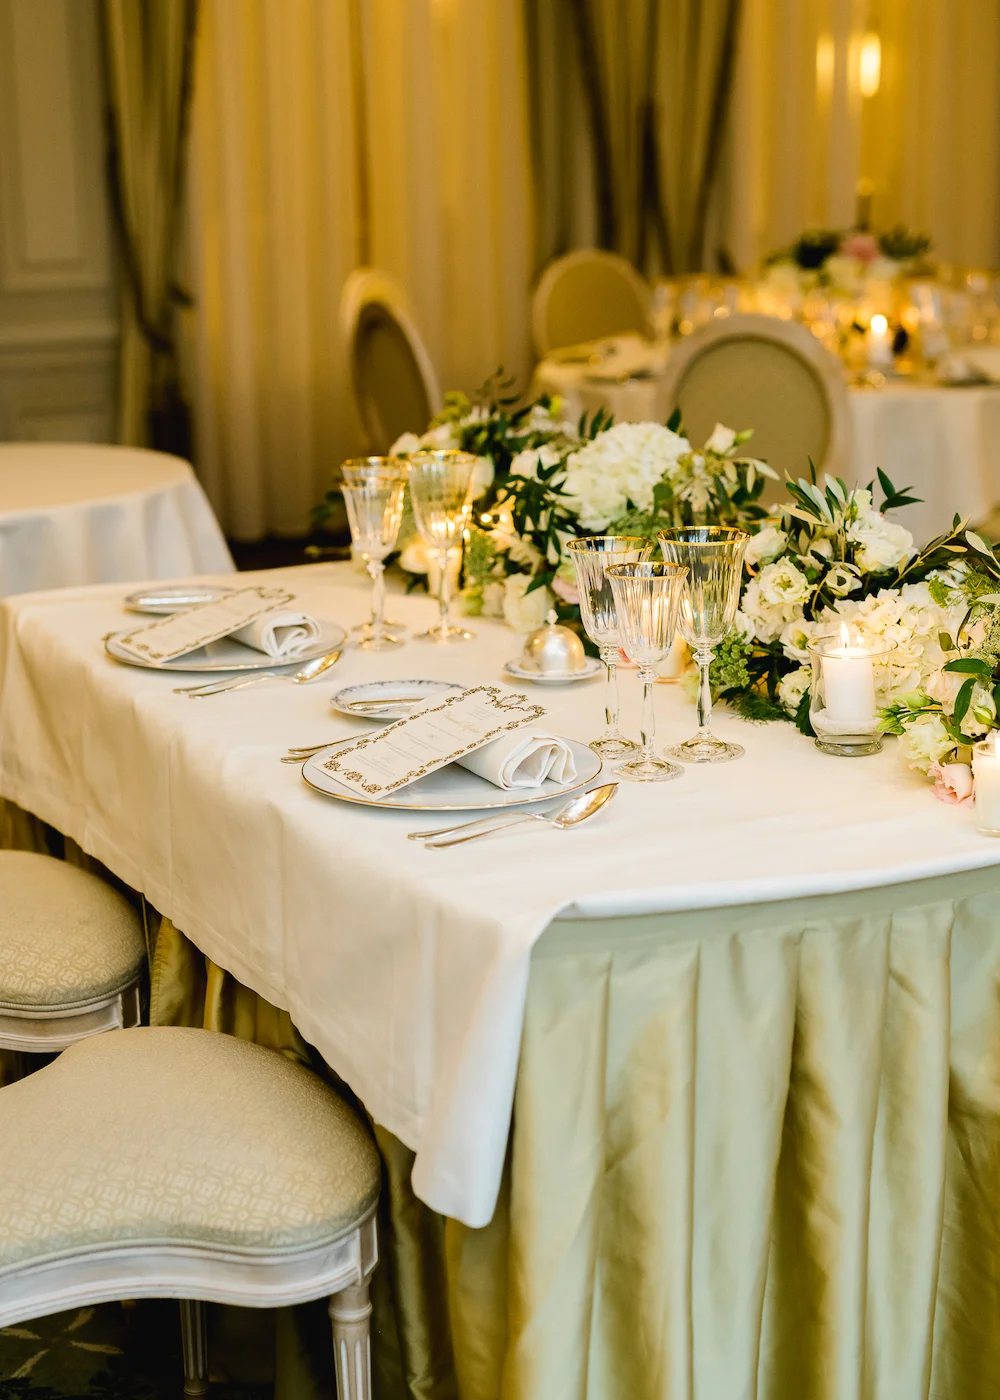 Sweetheart table at the Ritz Paris